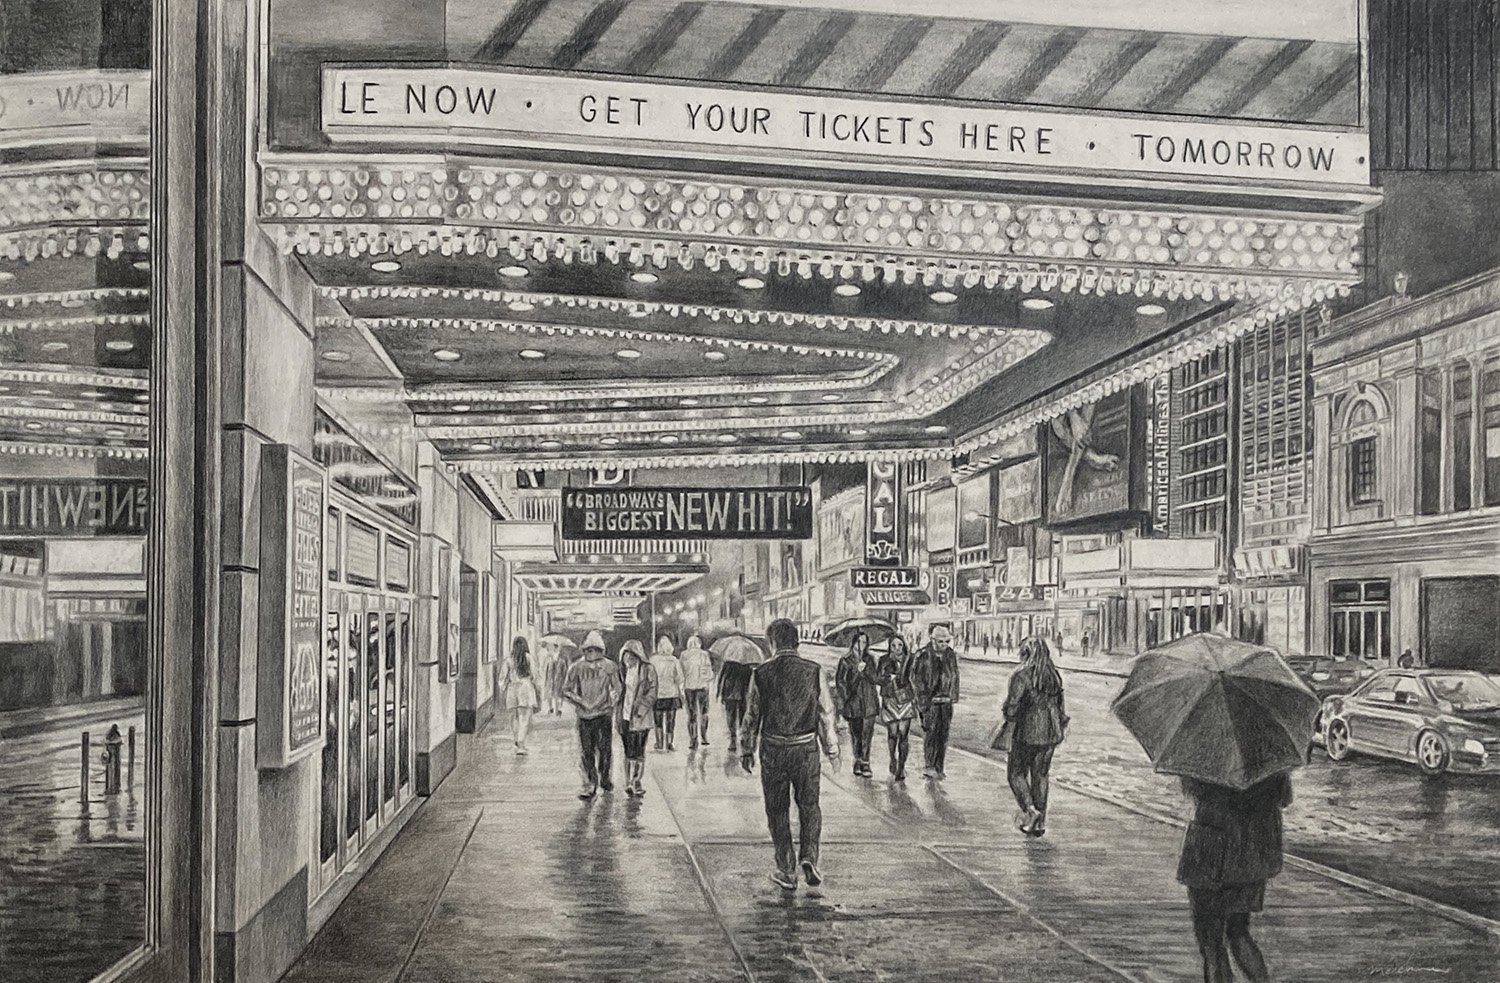 42nd Street, 13 x 20", pencil on paper